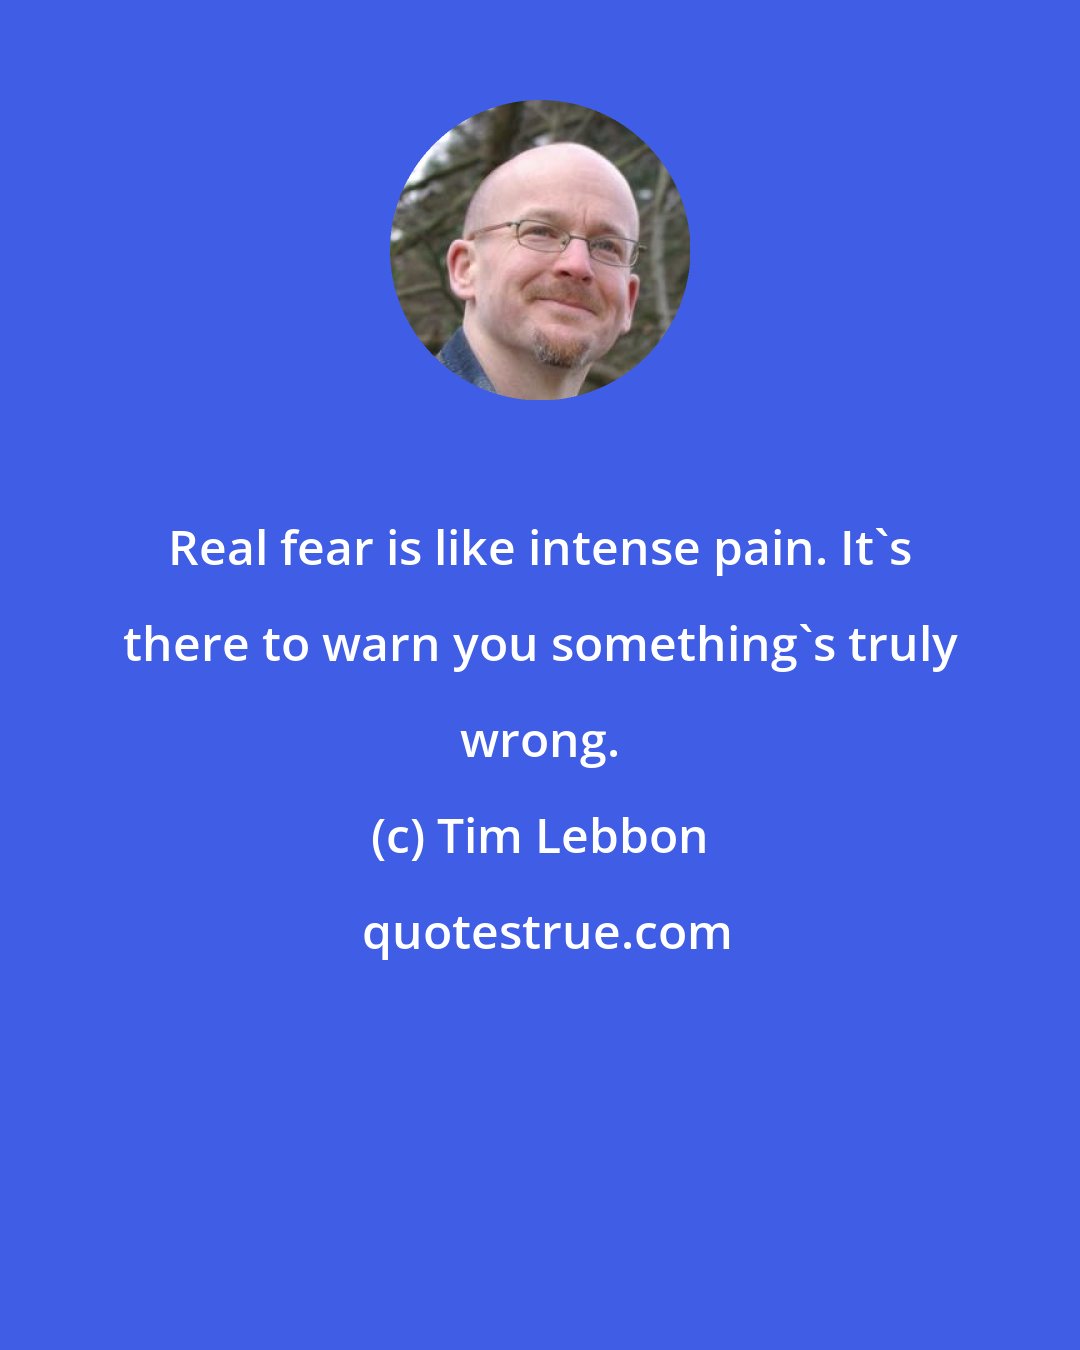 Tim Lebbon: Real fear is like intense pain. It's there to warn you something's truly wrong.